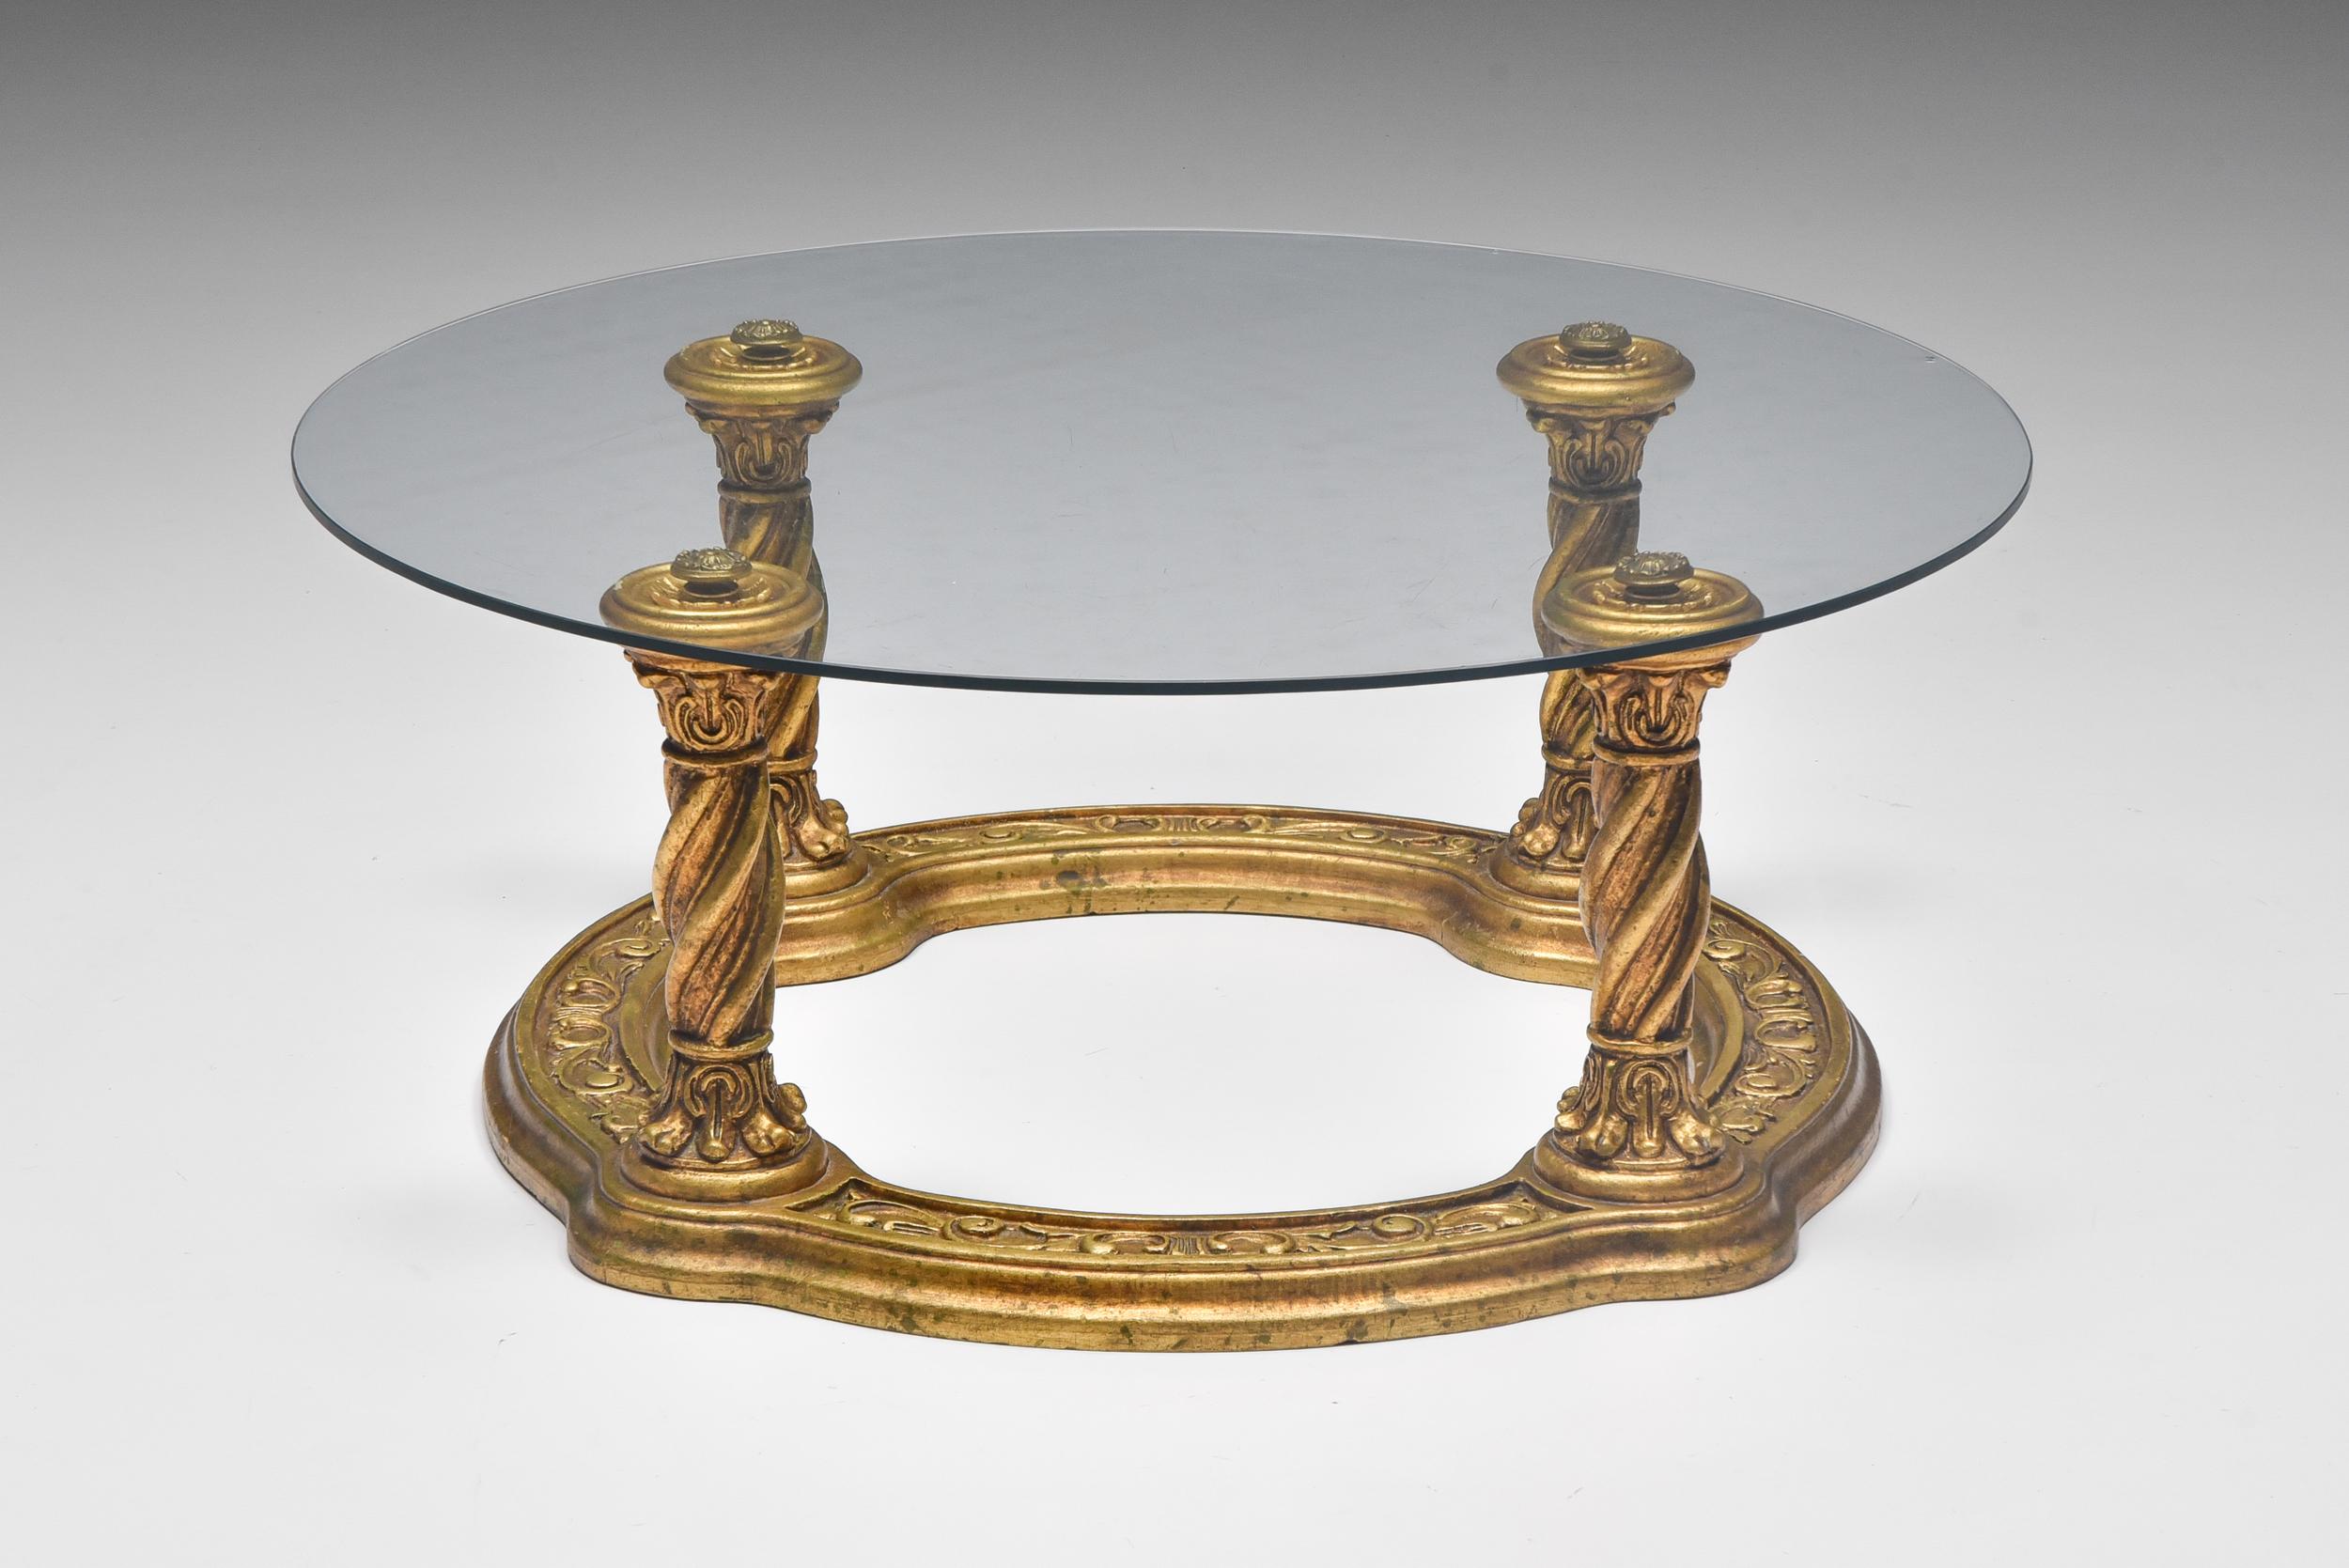 Hollywood Regency Carved Giltwood Coffee Table, Brass, Glass, 1940's For Sale 1